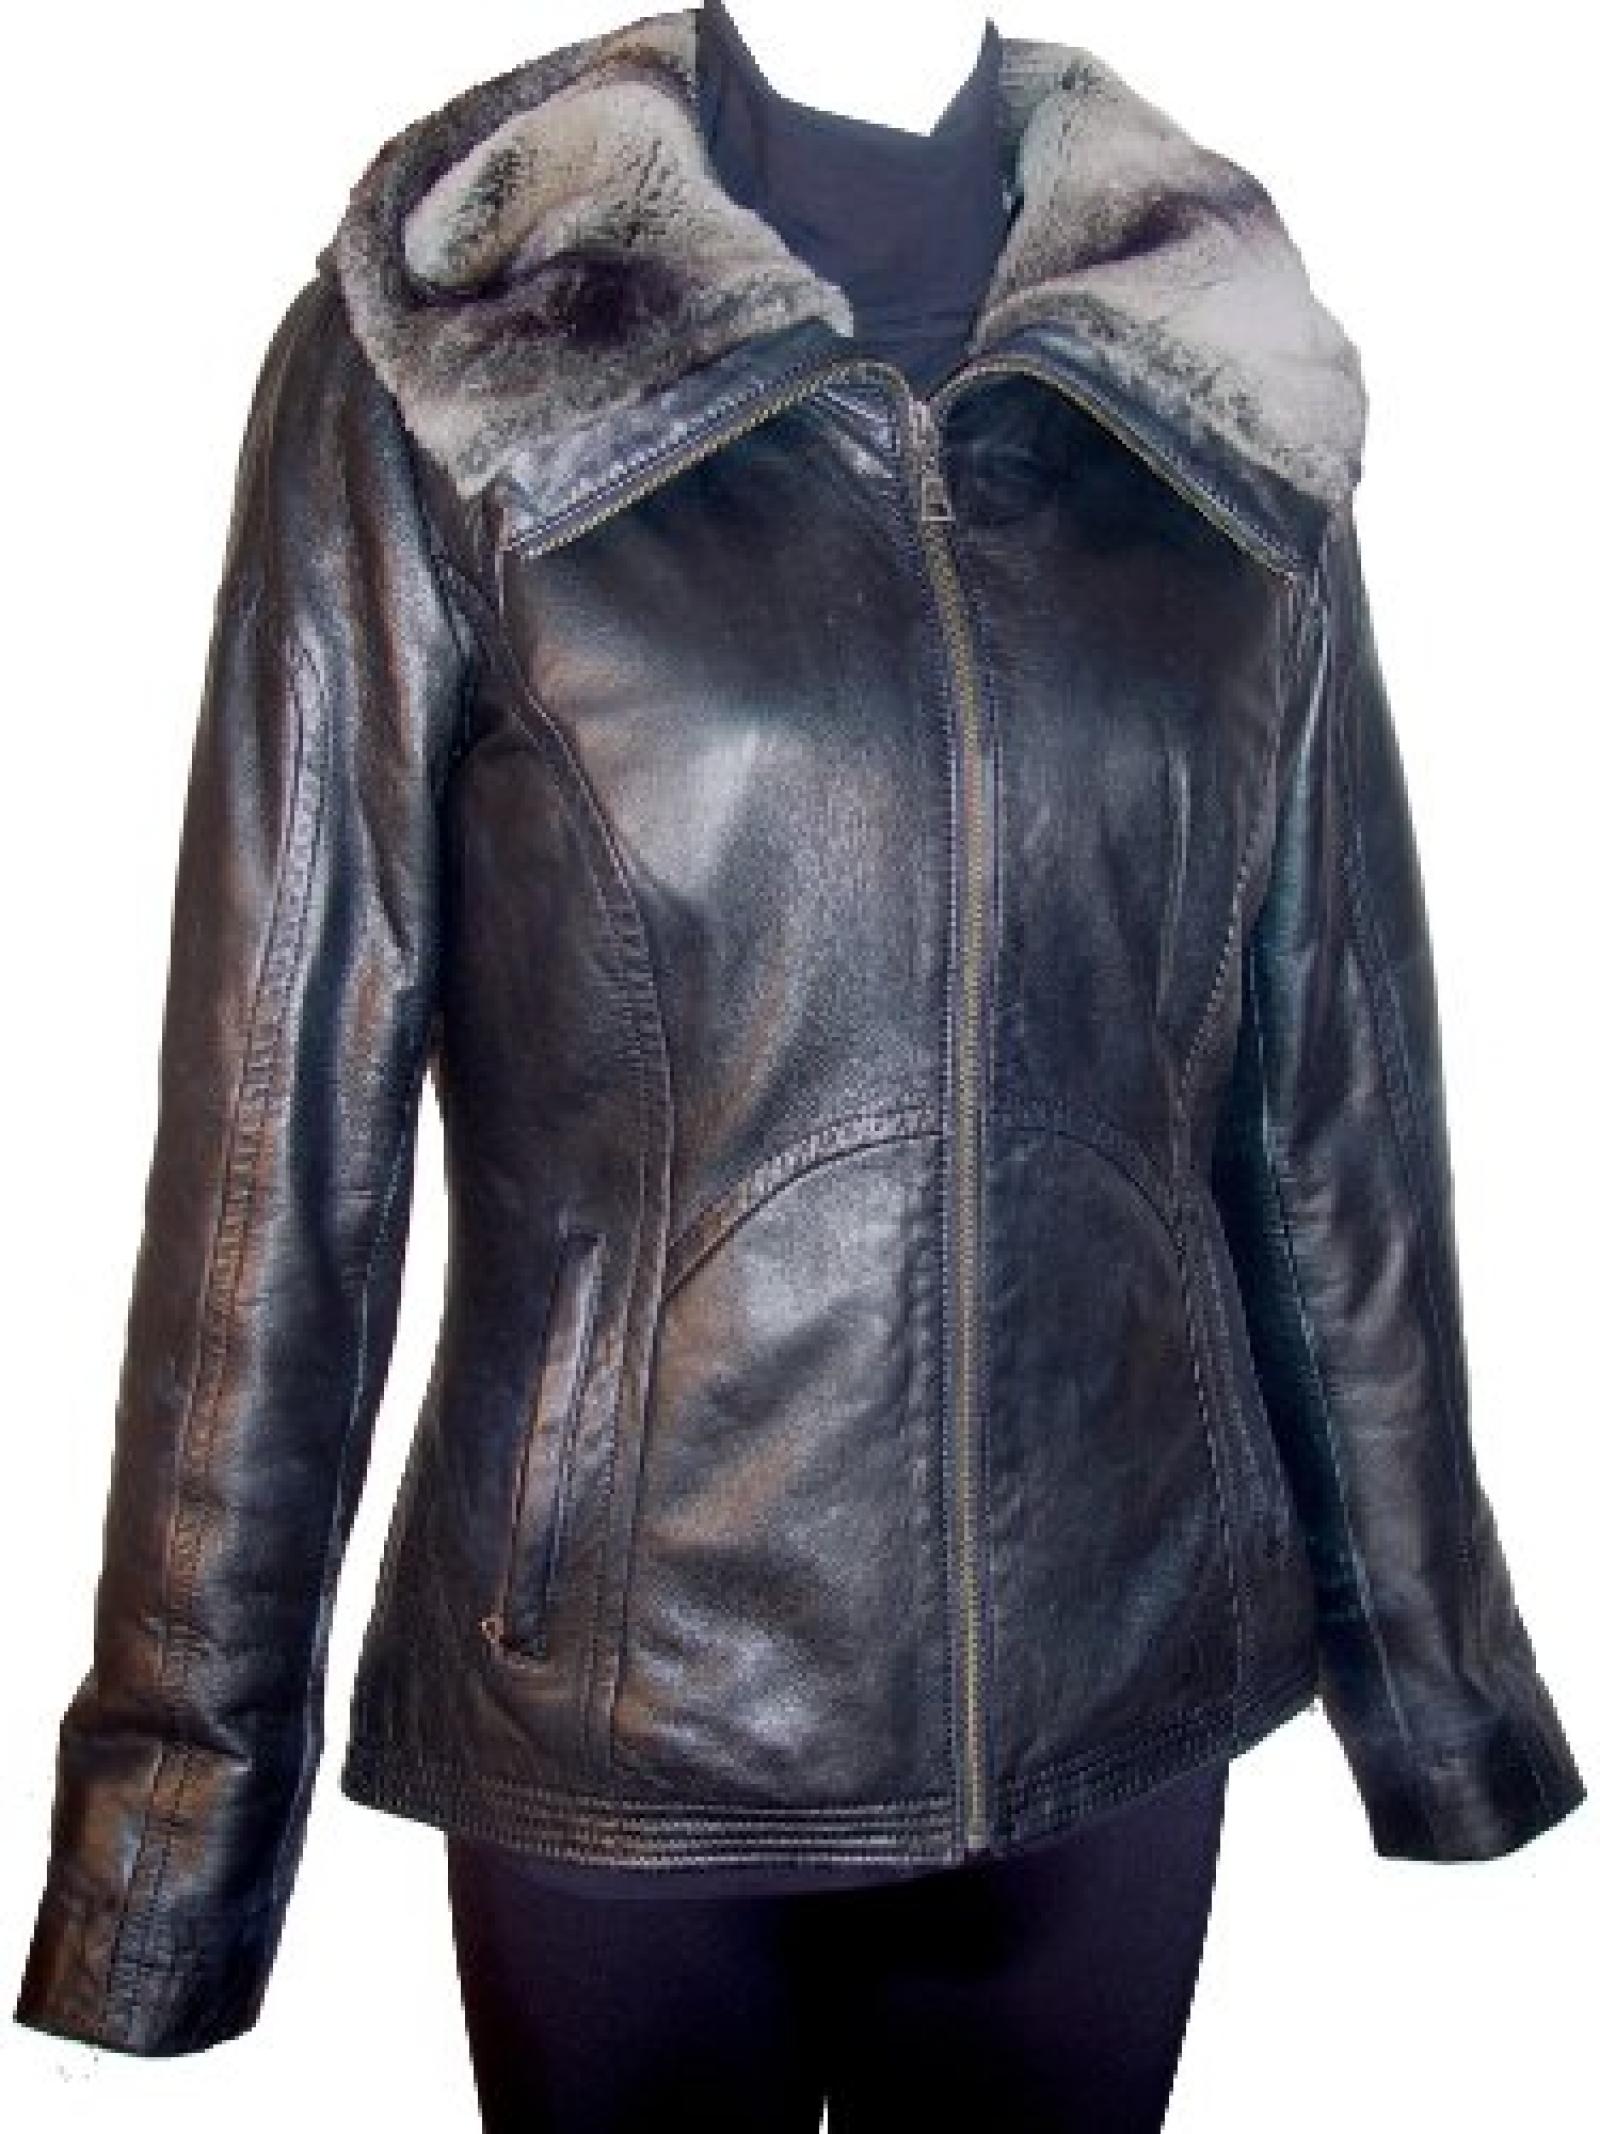 Paccilo FREE tailoring Womens 4000 Real Lambskin Short Leather Jacket Parka 